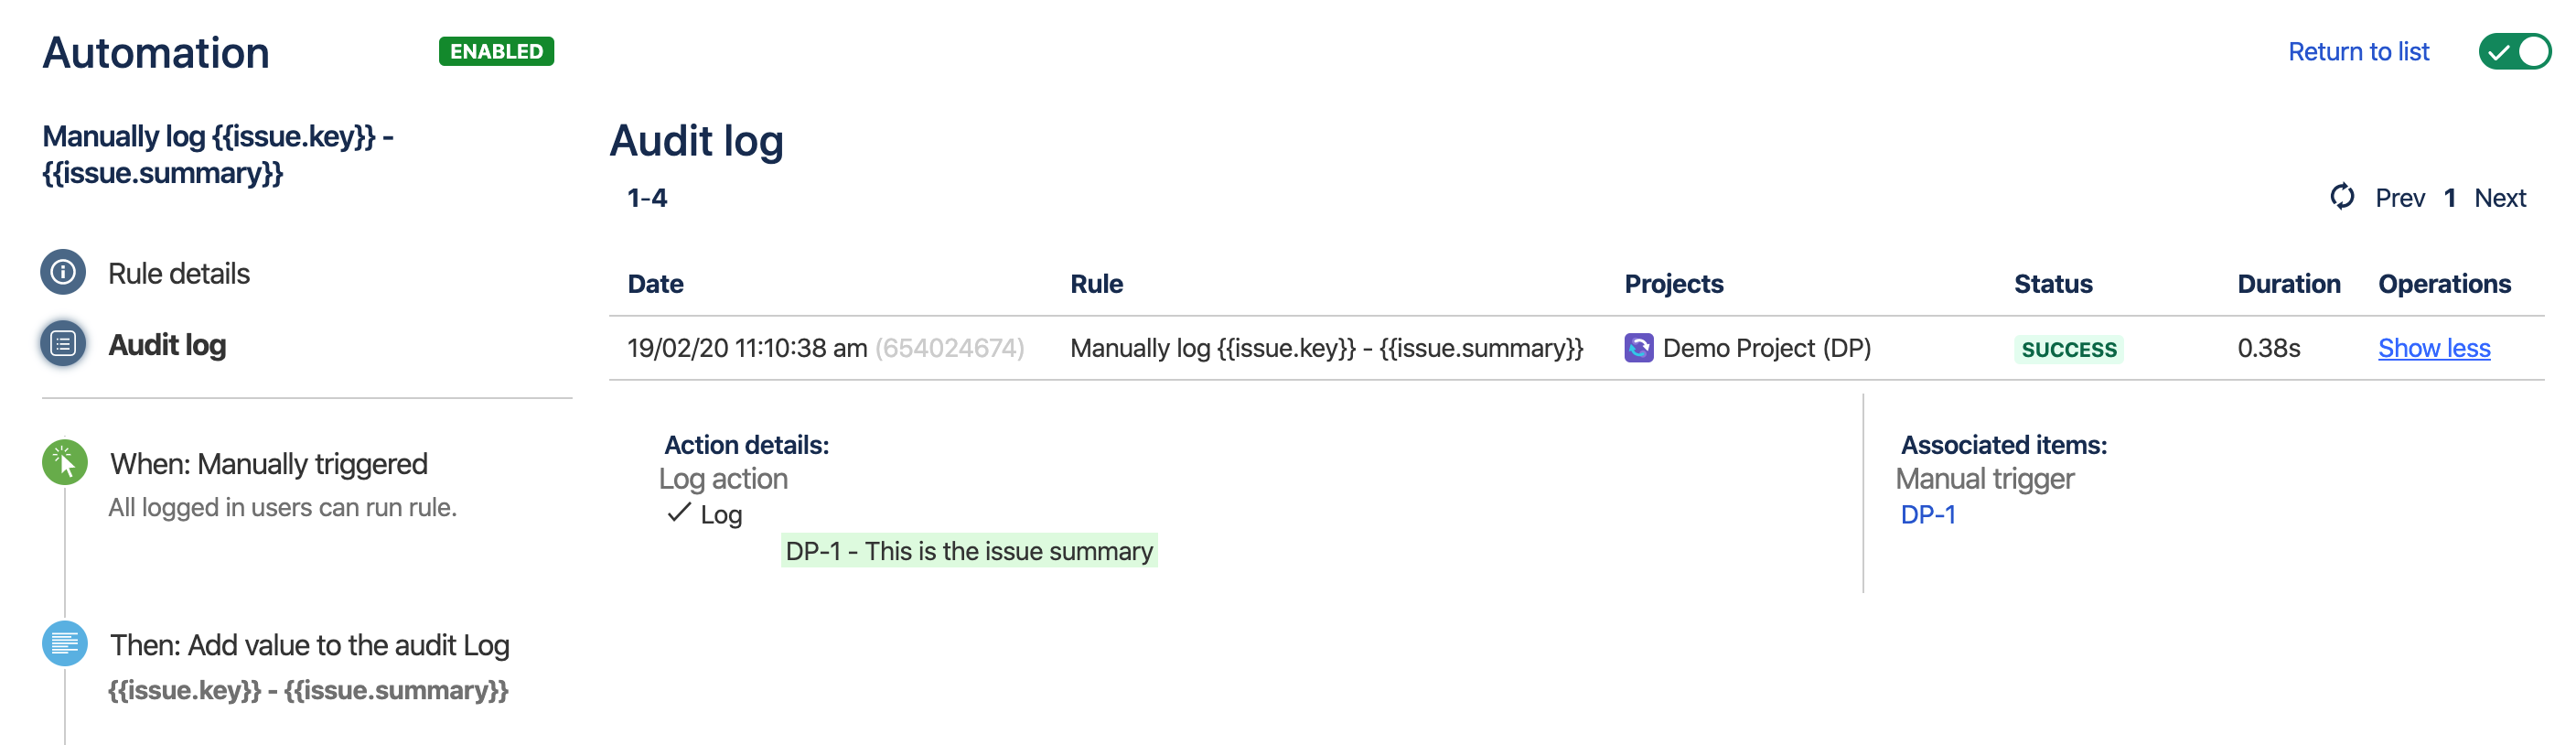 Audit log for an automation rule in Jira Cloud. It shows a successful Log action, with output "This is the issue summary".